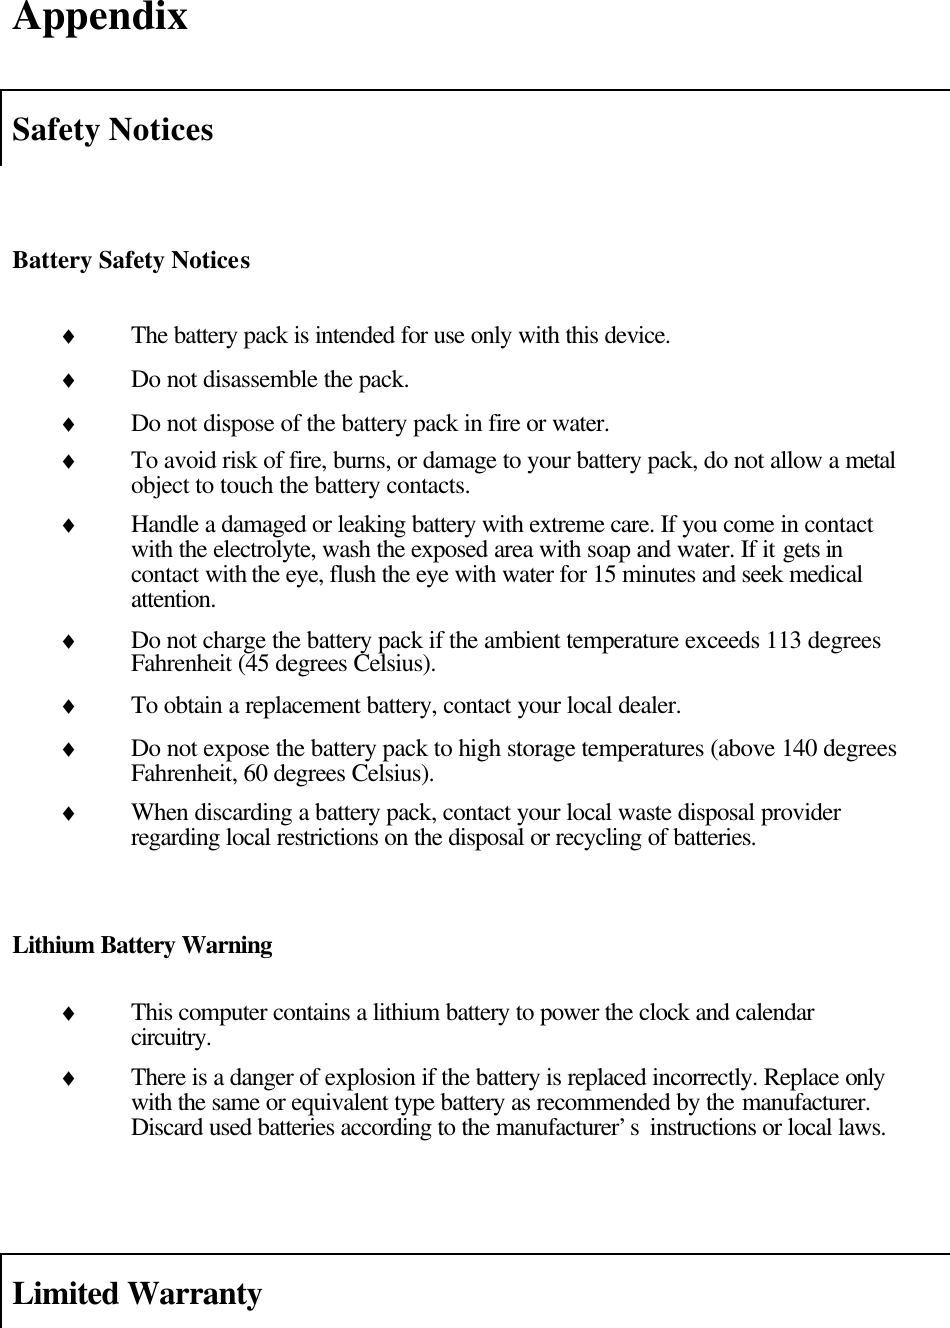  Appendix  Safety Notices   Battery Safety Notices  ♦ The battery pack is intended for use only with this device. ♦ Do not disassemble the pack. ♦ Do not dispose of the battery pack in fire or water. ♦ To avoid risk of fire, burns, or damage to your battery pack, do not allow a metal object to touch the battery contacts. ♦ Handle a damaged or leaking battery with extreme care. If you come in contact with the electrolyte, wash the exposed area with soap and water. If it gets in contact with the eye, flush the eye with water for 15 minutes and seek medical attention. ♦ Do not charge the battery pack if the ambient temperature exceeds 113 degrees Fahrenheit (45 degrees Celsius). ♦ To obtain a replacement battery, contact your local dealer. ♦ Do not expose the battery pack to high storage temperatures (above 140 degrees Fahrenheit, 60 degrees Celsius). ♦ When discarding a battery pack, contact your local waste disposal provider regarding local restrictions on the disposal or recycling of batteries.   Lithium Battery Warning  ♦ This computer contains a lithium battery to power the clock and calendar circuitry. ♦ There is a danger of explosion if the battery is replaced incorrectly. Replace only with the same or equivalent type battery as recommended by the manufacturer. Discard used batteries according to the manufacturer’s  instructions or local laws.    Limited Warranty   